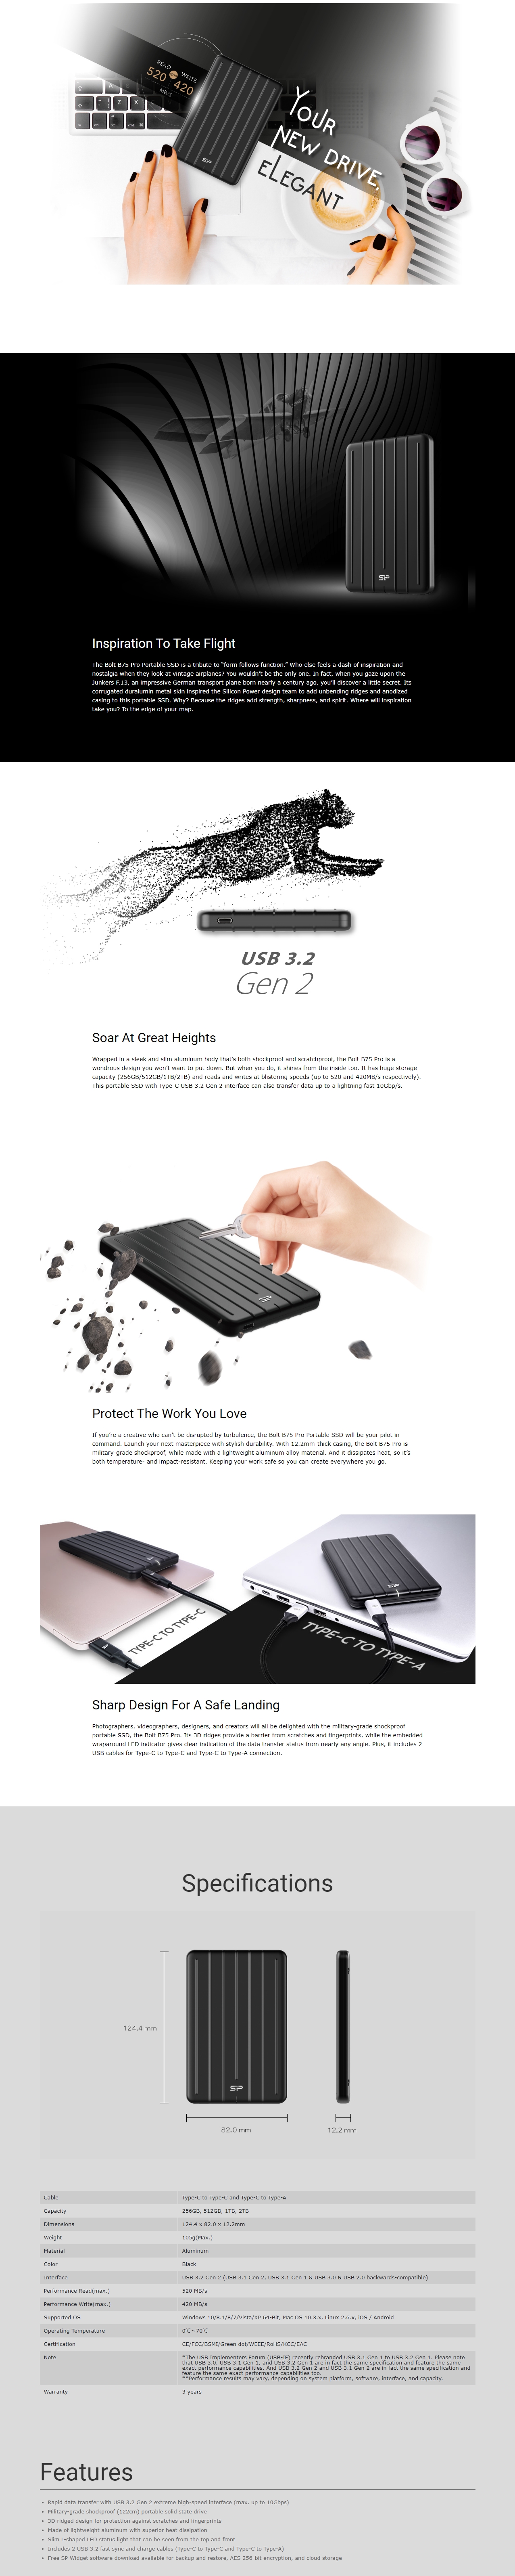 A large marketing image providing additional information about the product Silicon Power Bolt B75 Pro 512GB Portable SSD - Additional alt info not provided